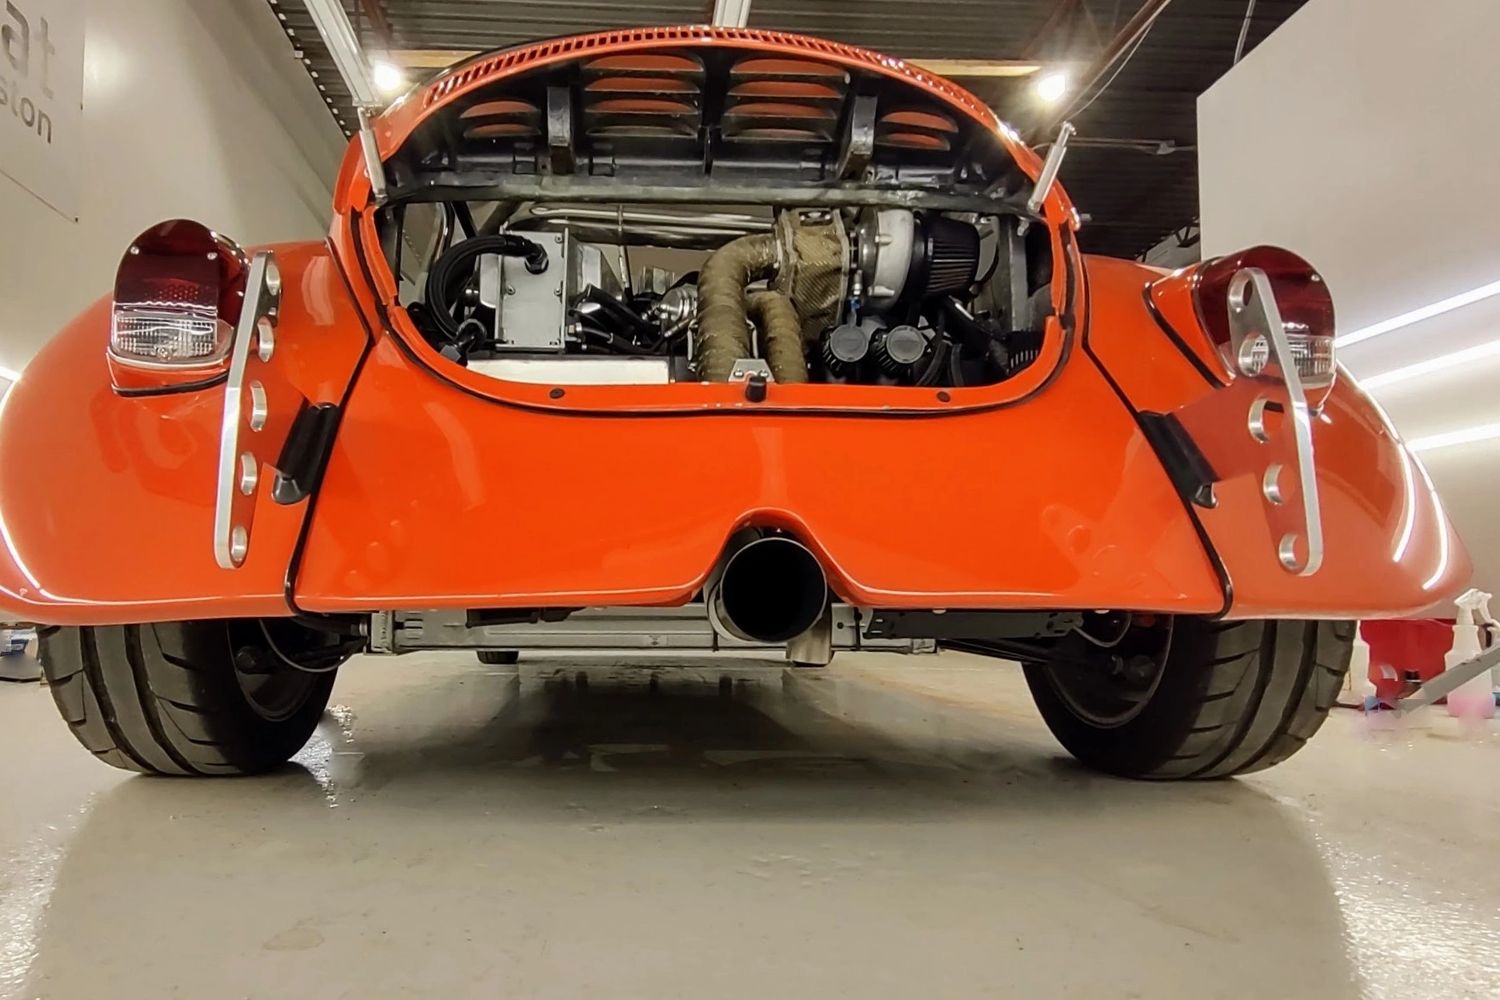 VR6 Turbo in a VW Bug